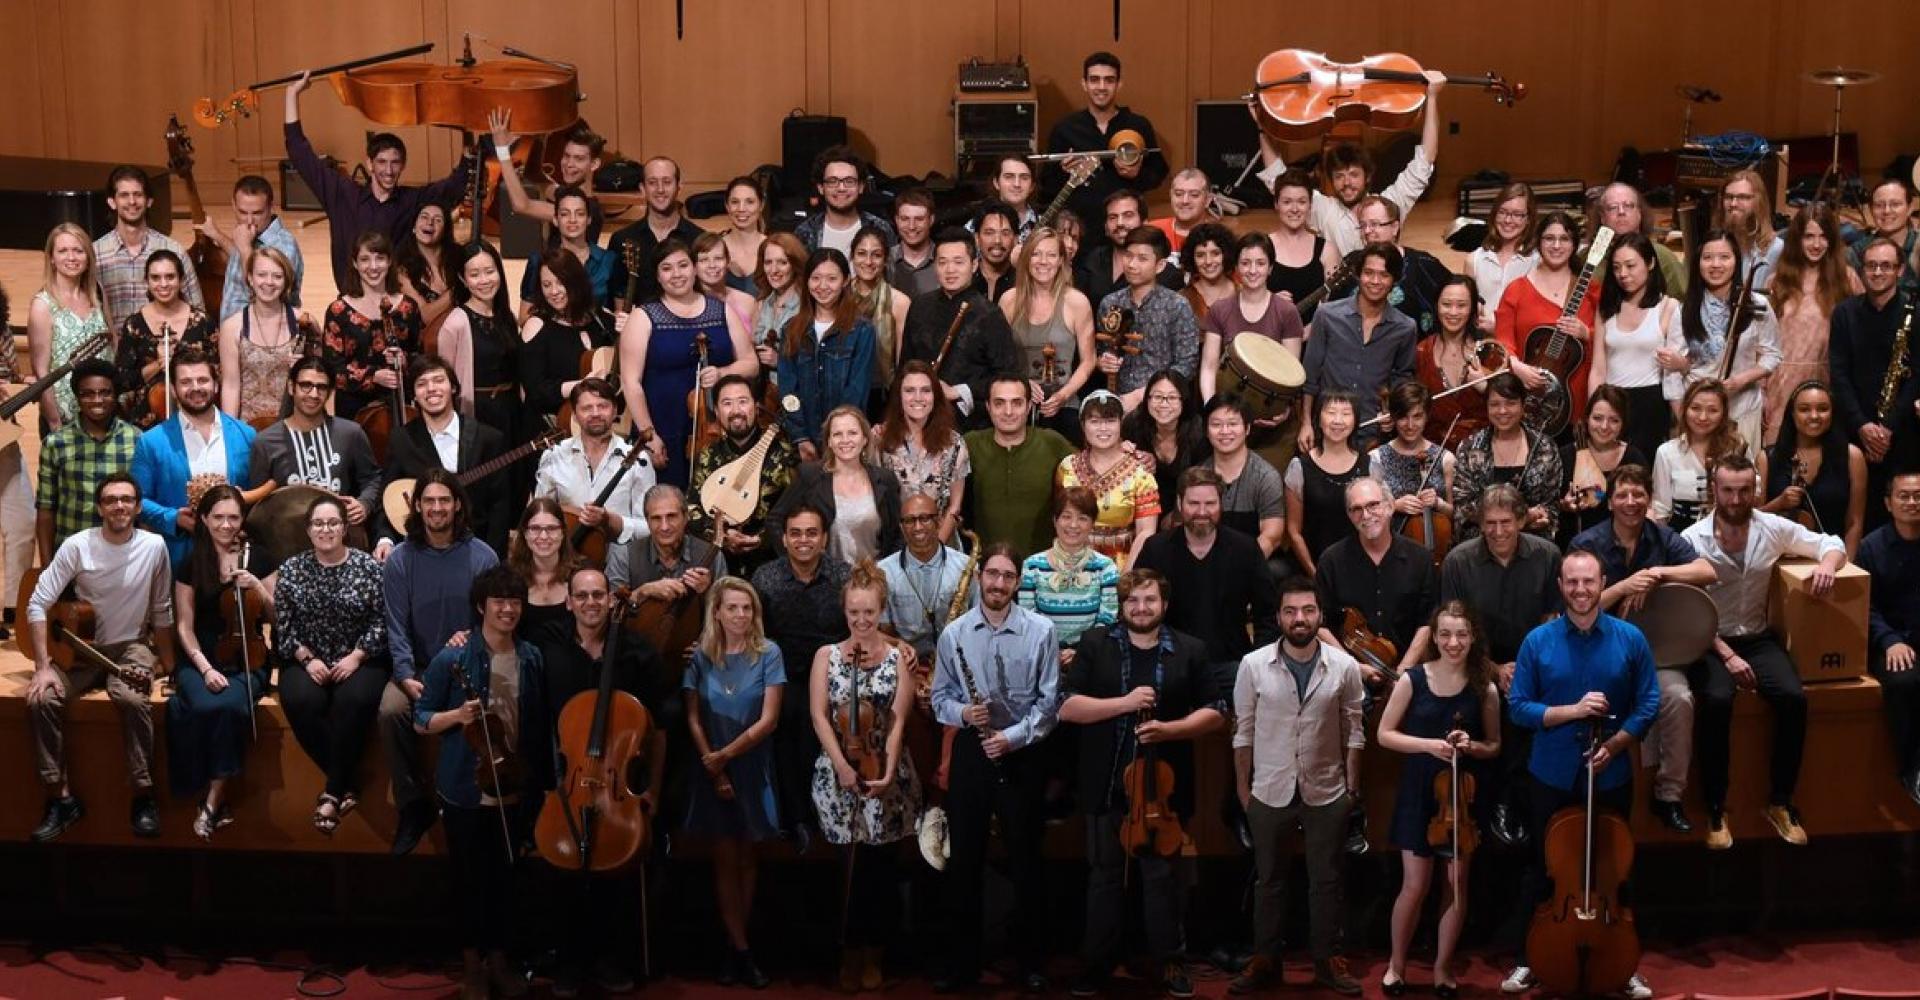 A large group of musicians from Silkroad's Global Musician Workshop crowd onto a stage to smile at the camera.